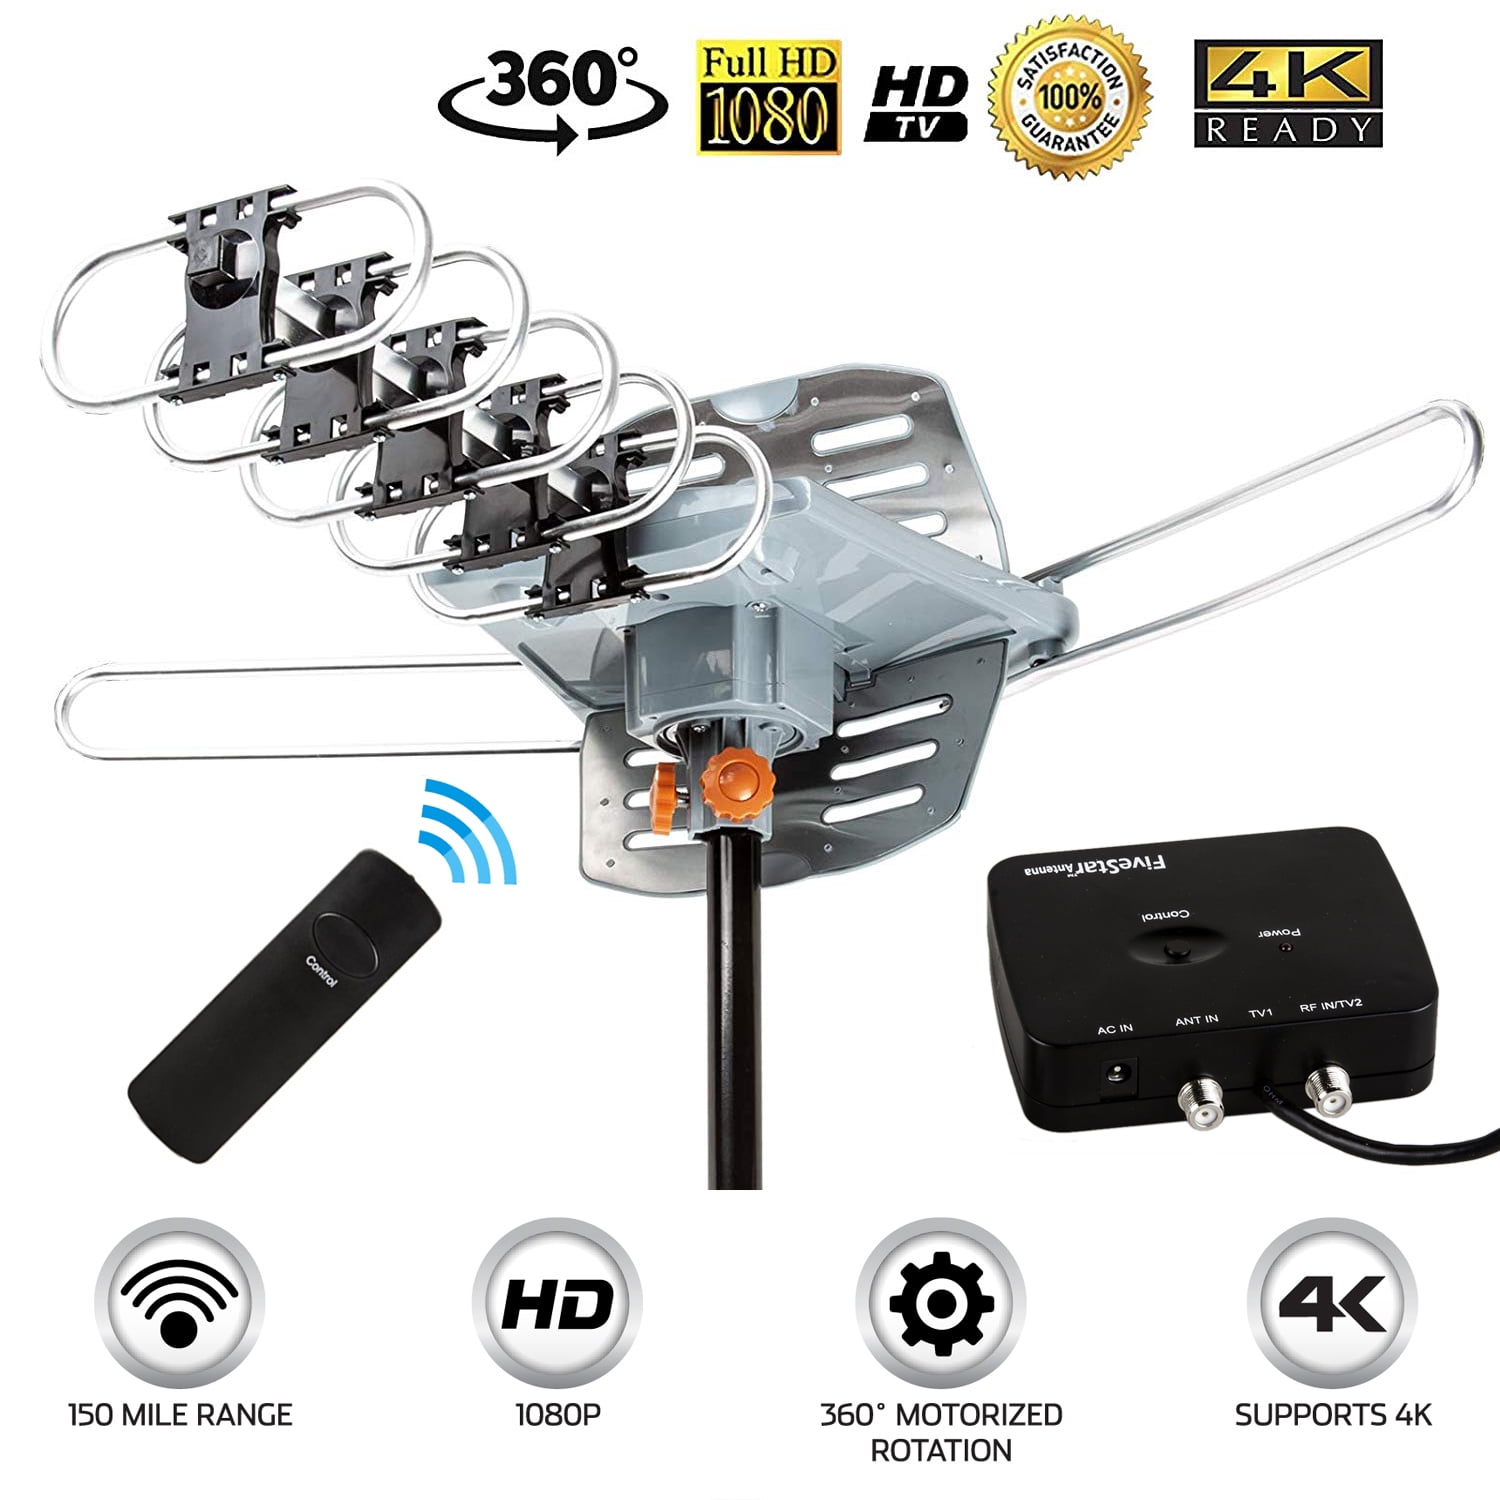 Waterproof TV Antenna Easy Install Upgraded 360° Reception Up to 300 Miles Range HD Digital TV Antenna with Adjust Amplifier Supports 4K 1080P 33ft Coax Cable YEMIUGO HD TV Antenna Indoor Outdoor 